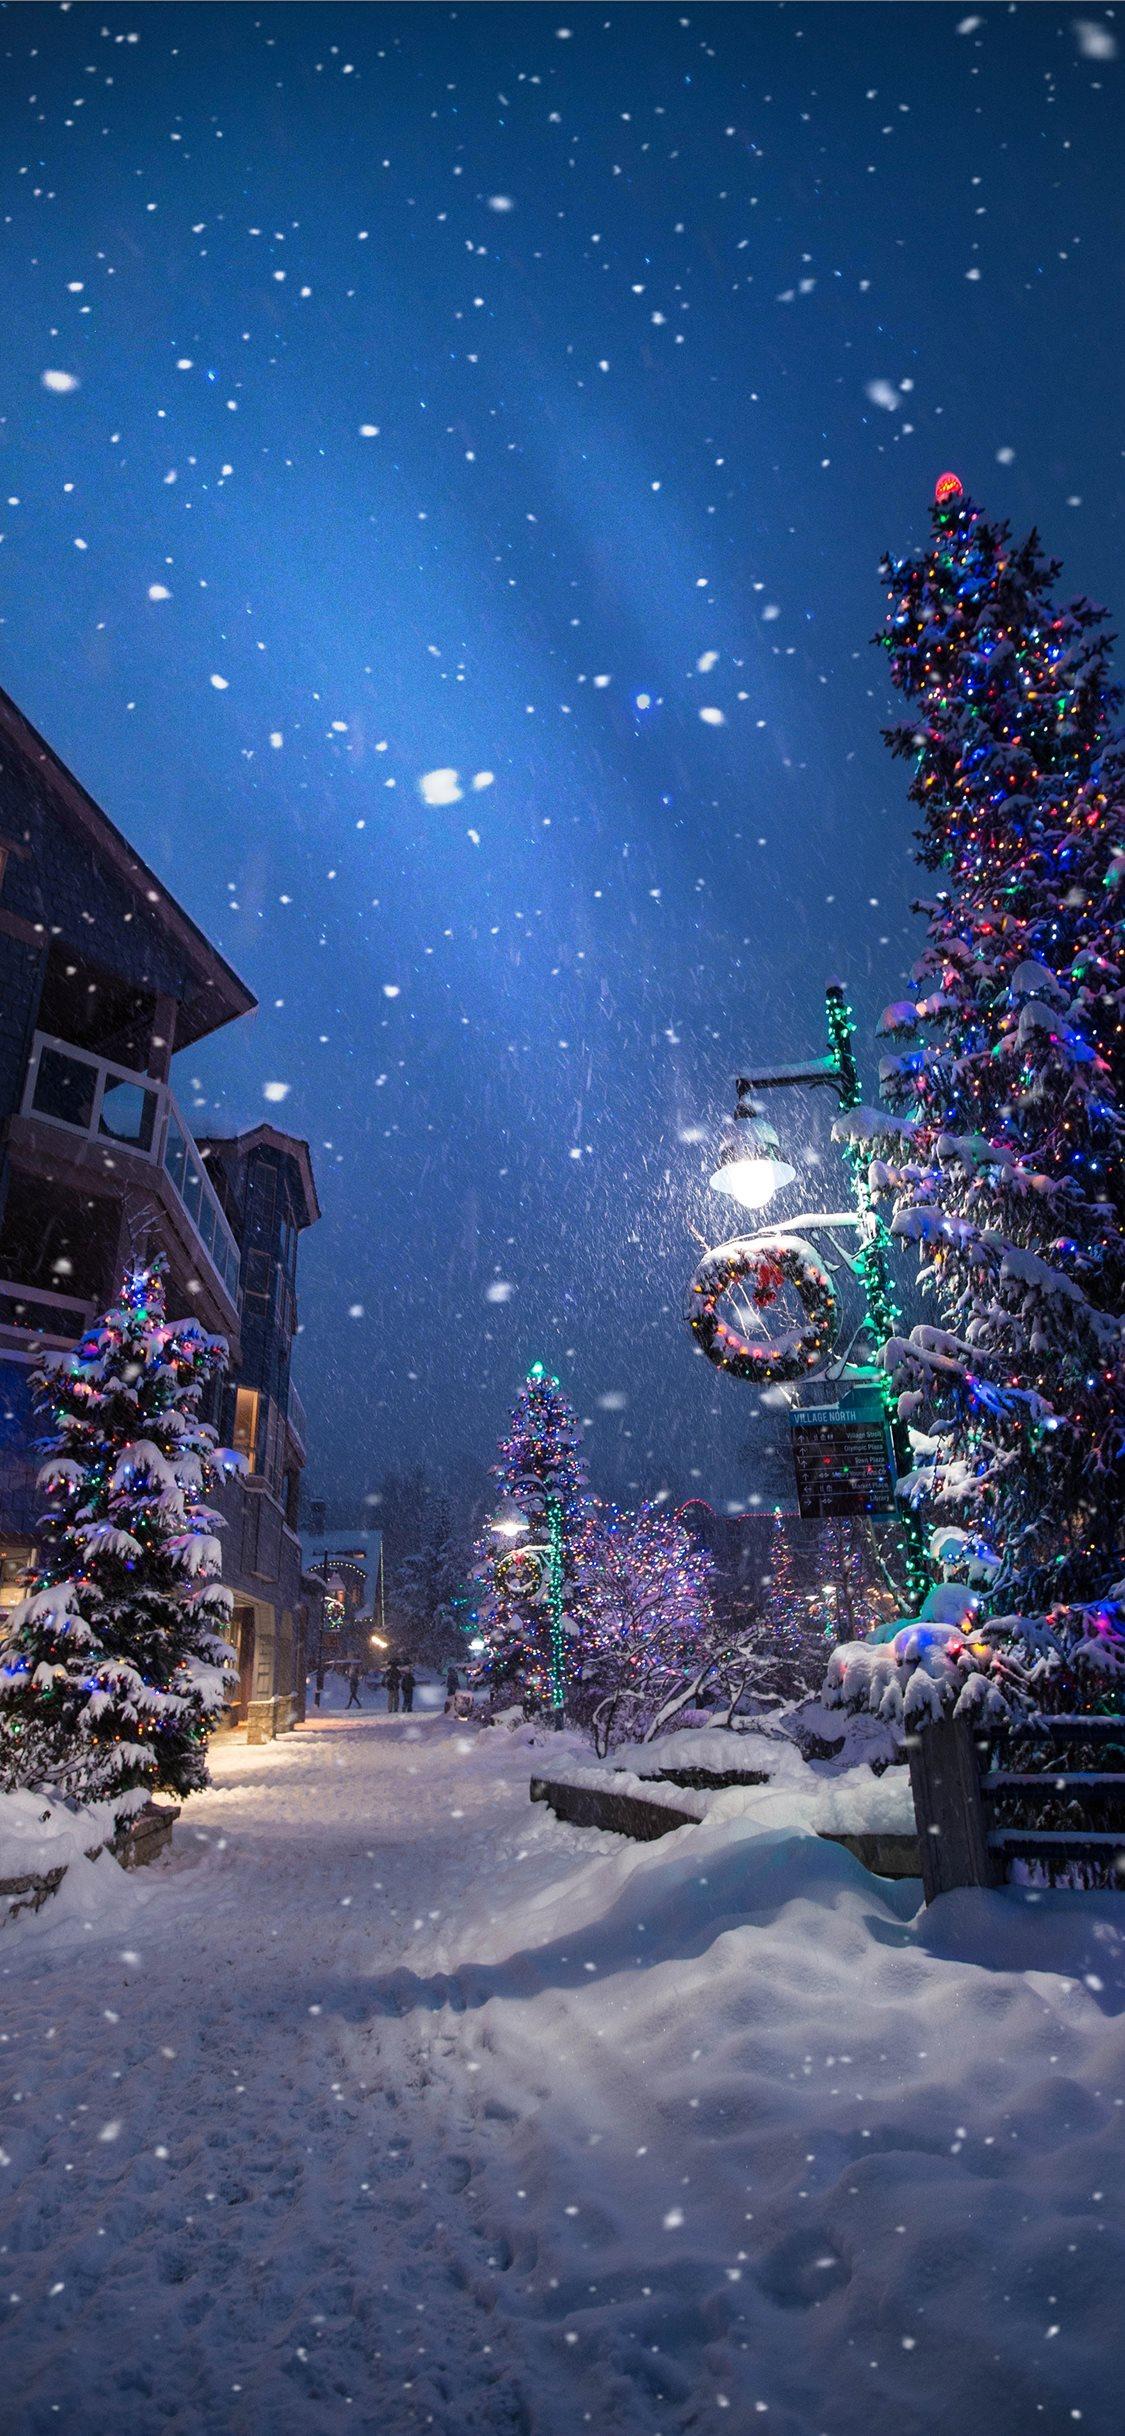 Magic in the Whistler Village iPhone X Wallpaper Download. iPhone